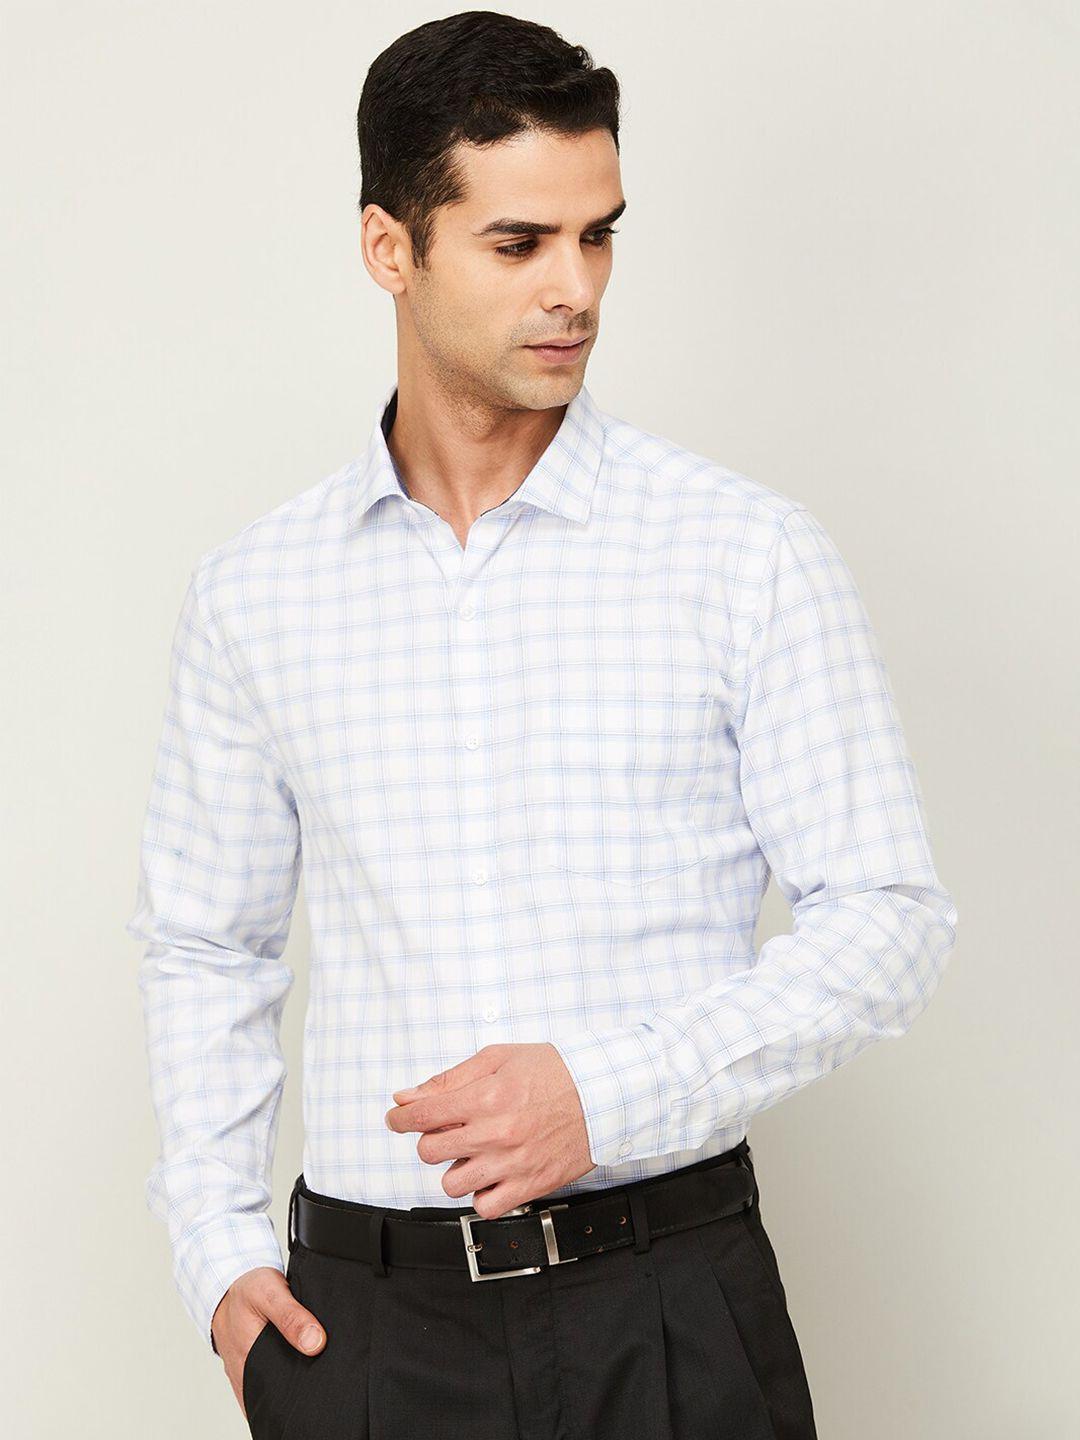 code-by-lifestyle-grid-tattersall-checked-spread-collar-cotton-slim-fit-formal-shirt